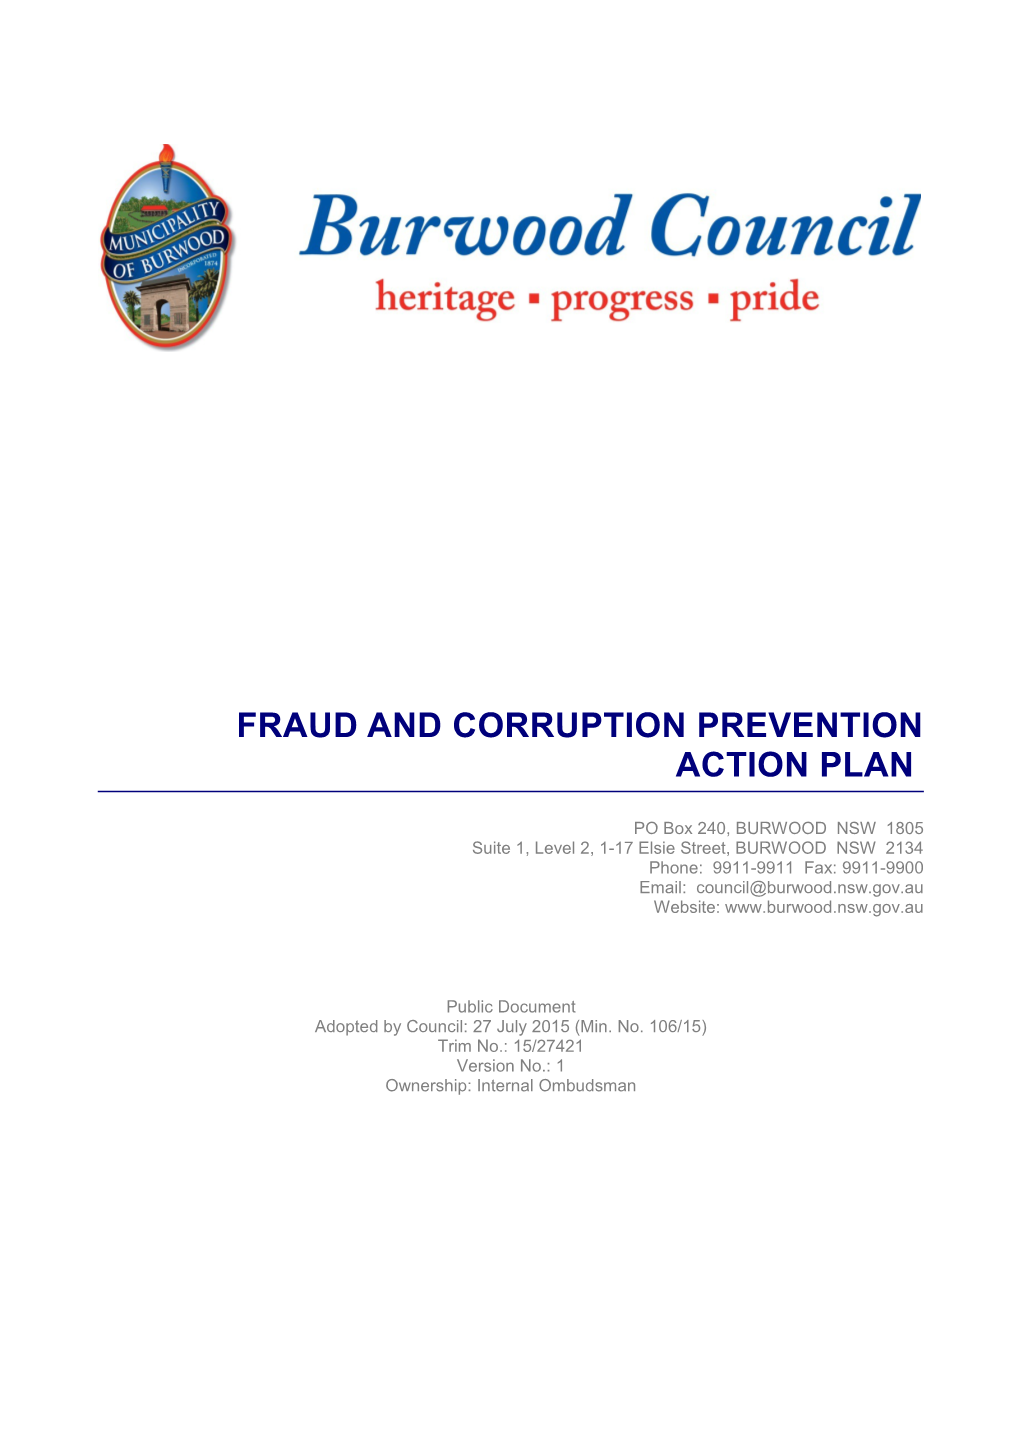 Fraud and Corruption Prevention Action Plan